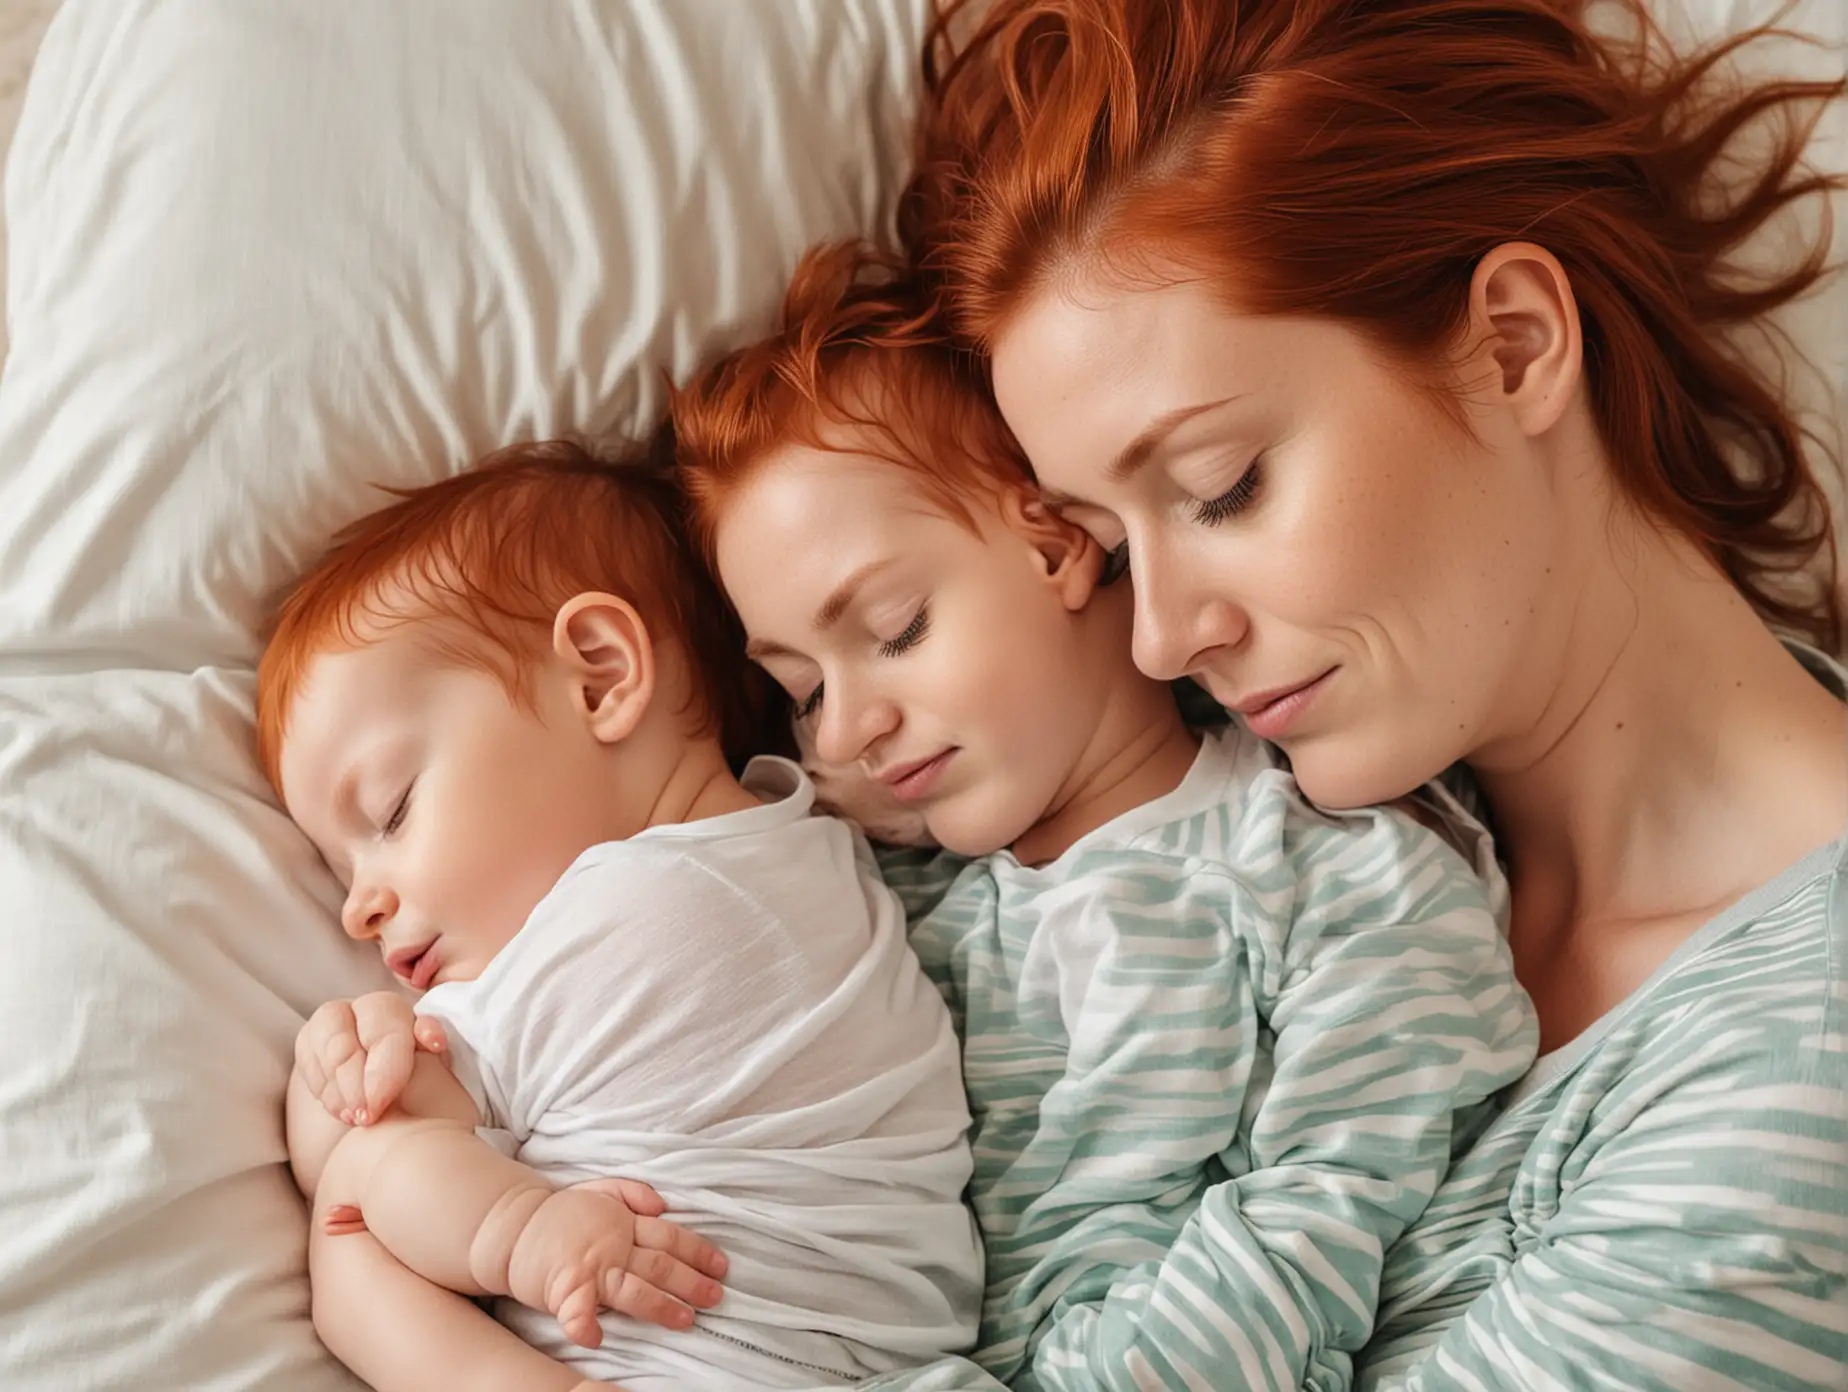 A mom with a baby with red hair and a toddler taking a nap 